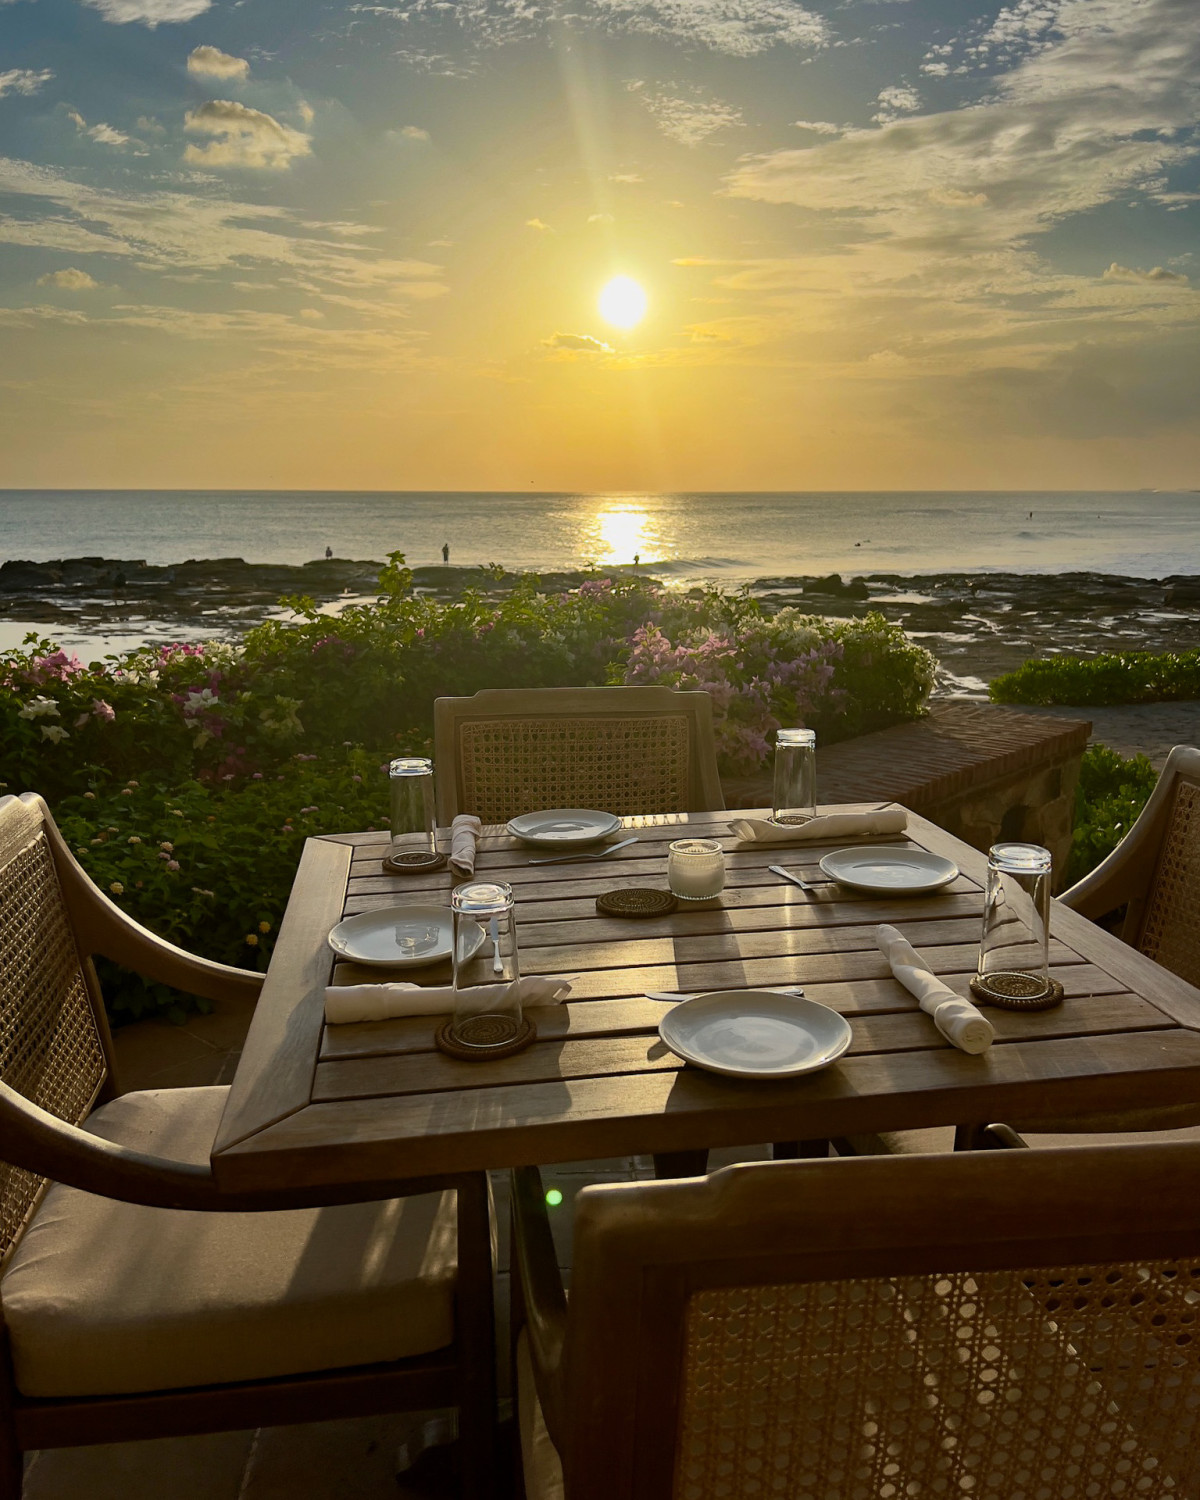 An outdoor dining area with a wooden table, set with plates, glasses and cutlery, overlooking the landscape and sea at sunset.